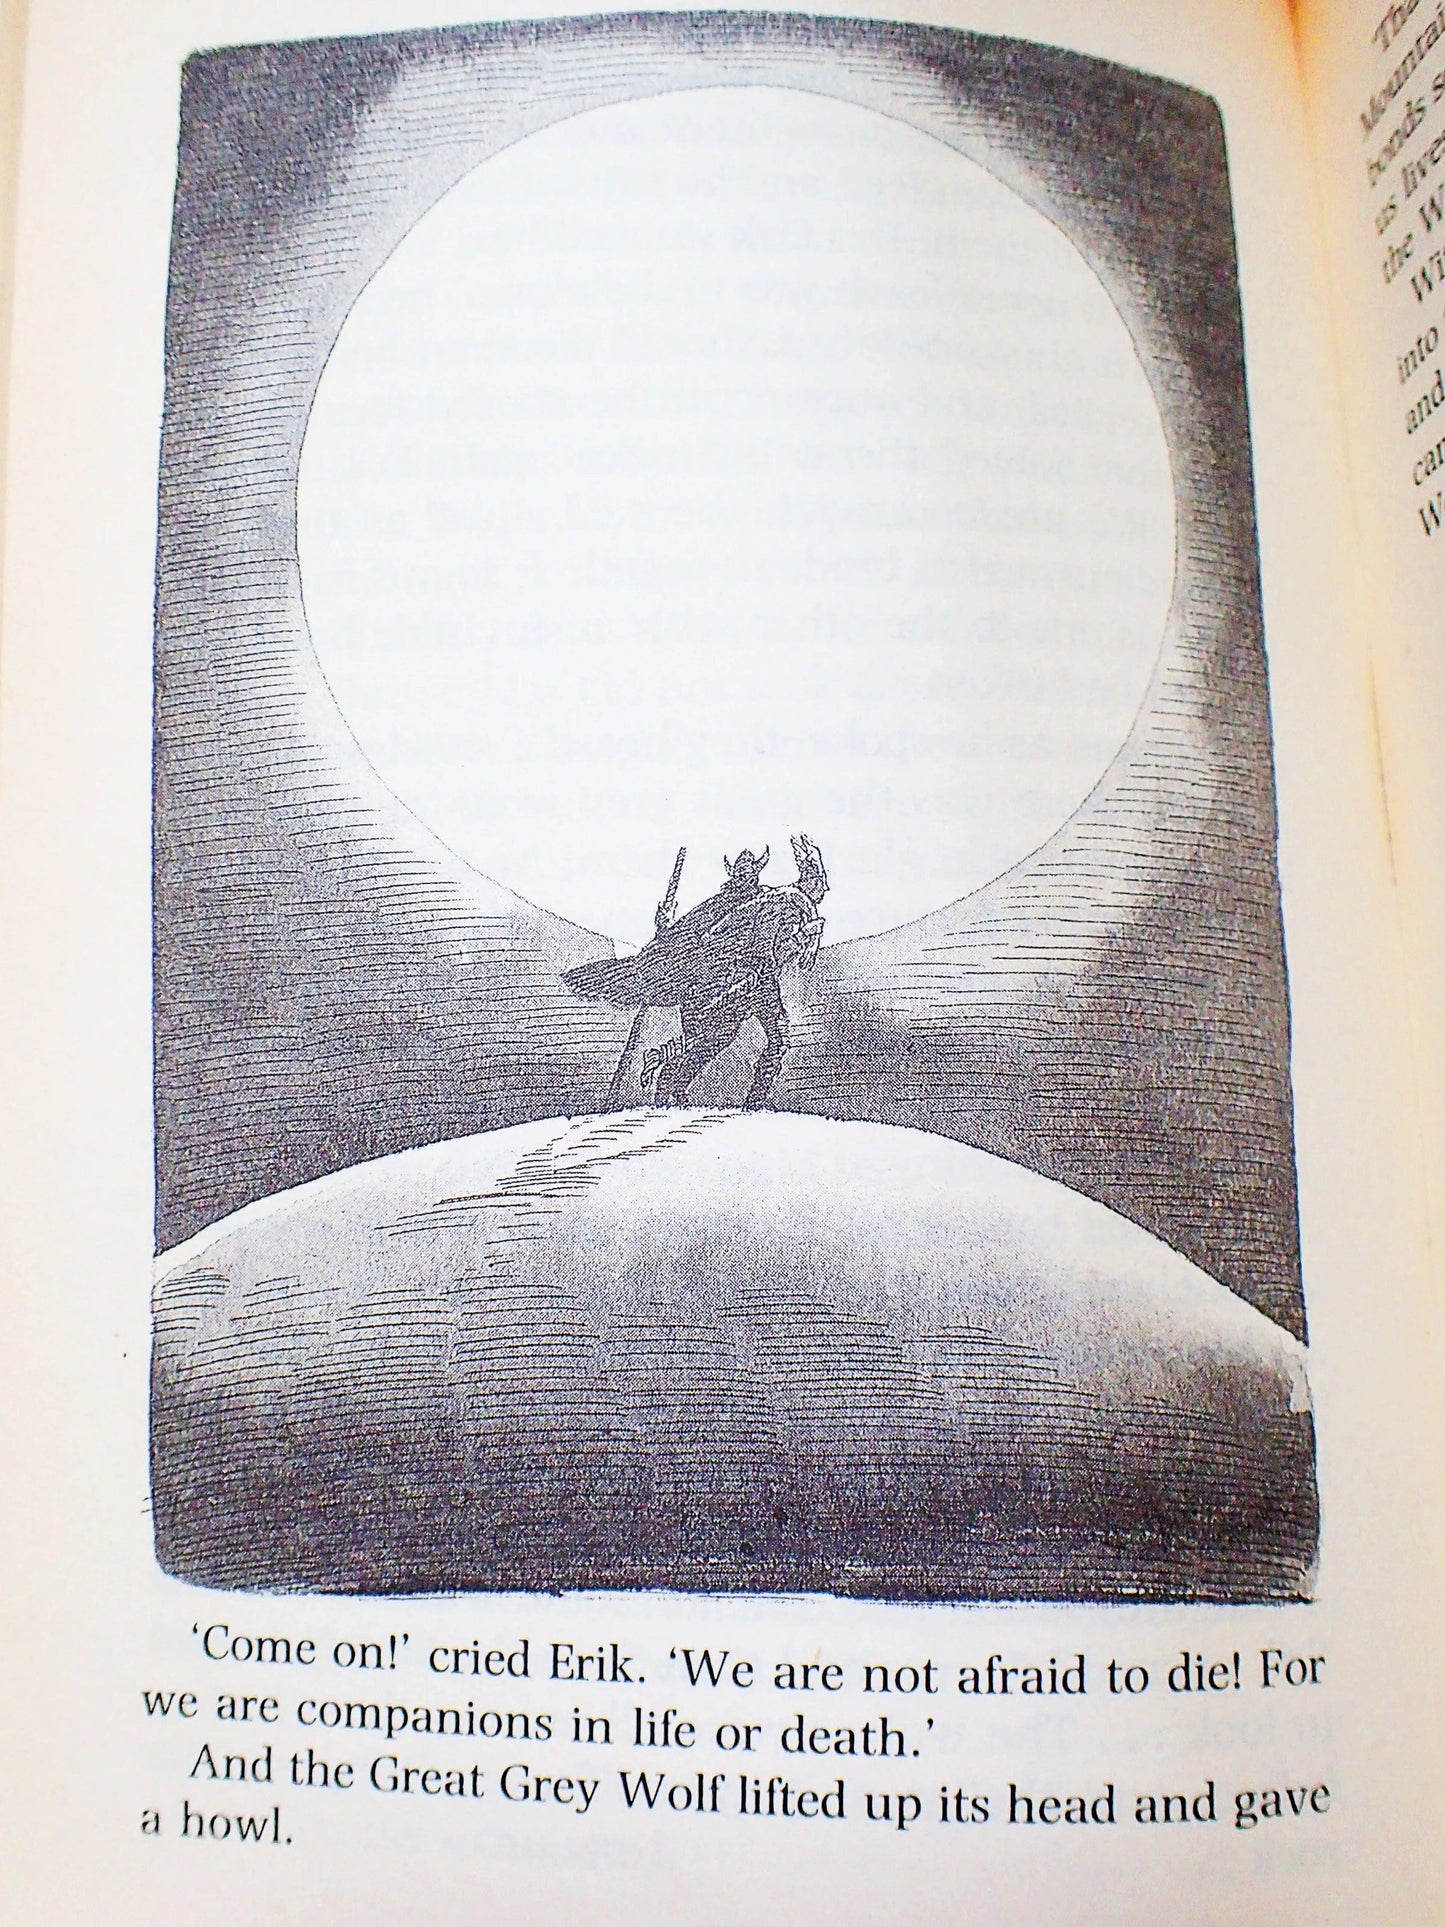 Page of The Saga of Erik the Viking by Terry Jones Vintage Puffin Children's Book 1988 showing a grayscale image of a Viking against a sunset. 